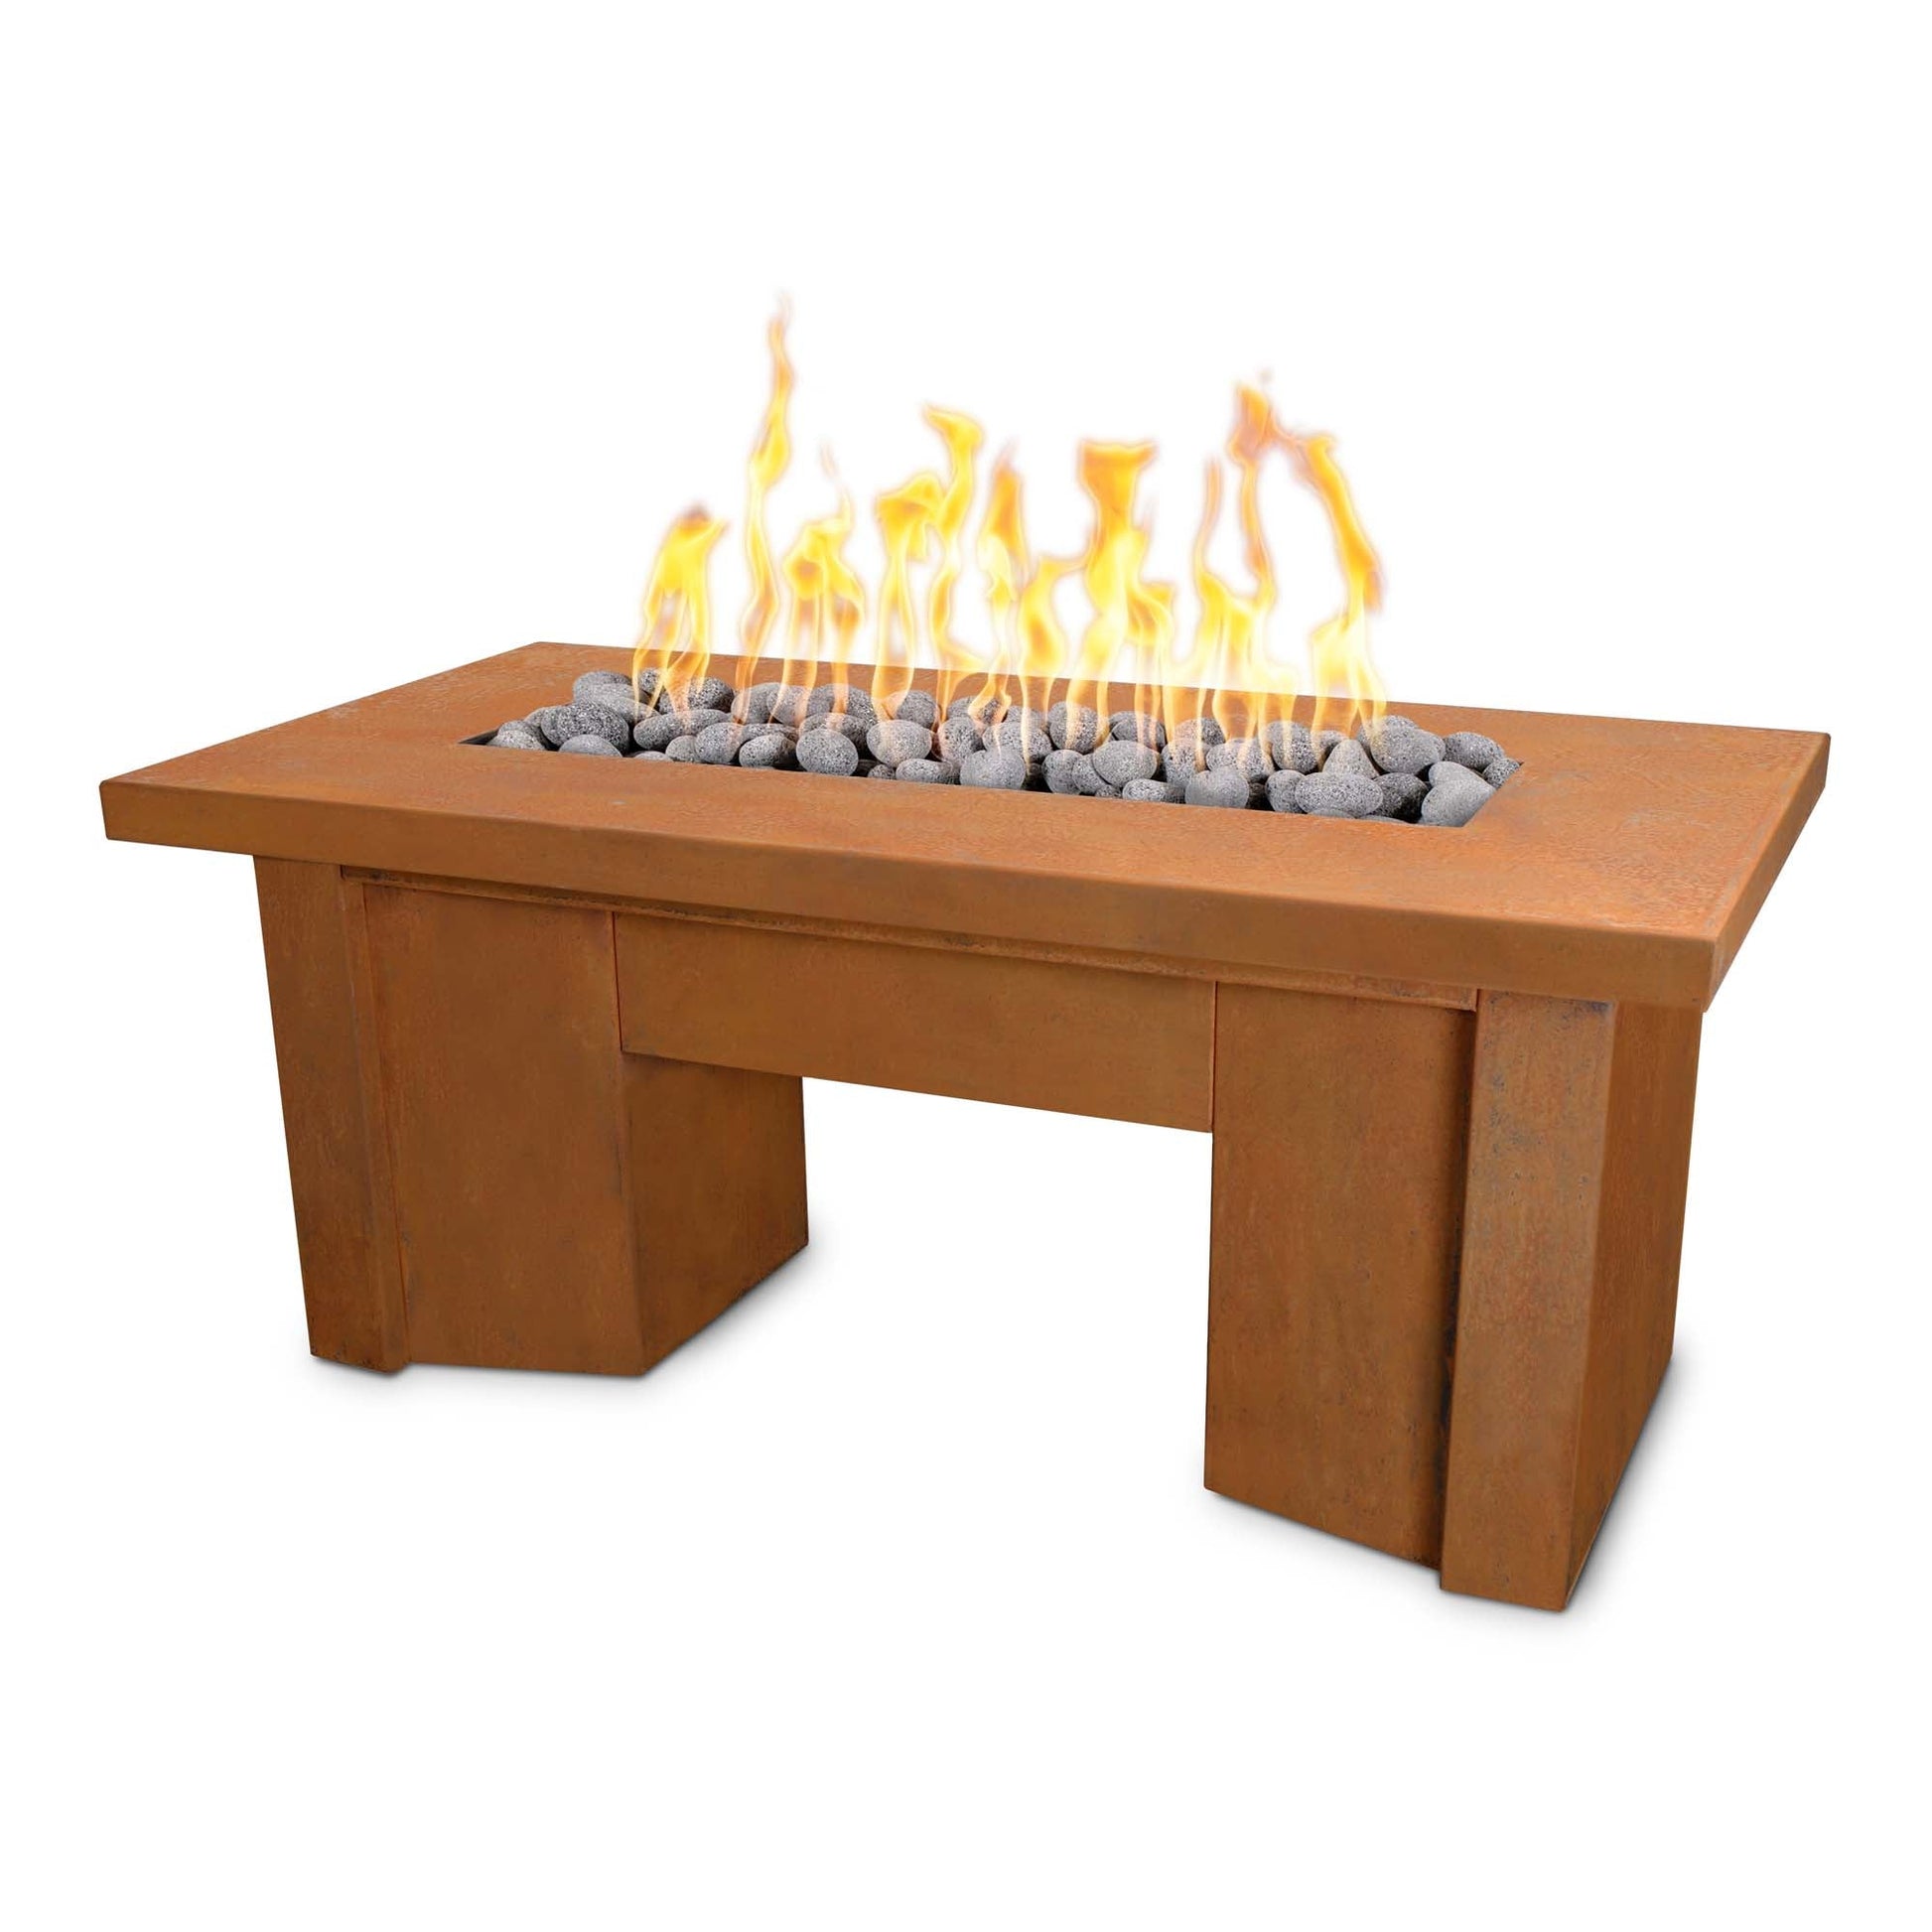 The Outdoor Plus Rectangular Alameda 48" Corten Steel Natural Gas Fire Pit with Match Lit with Flame Sense Ignition